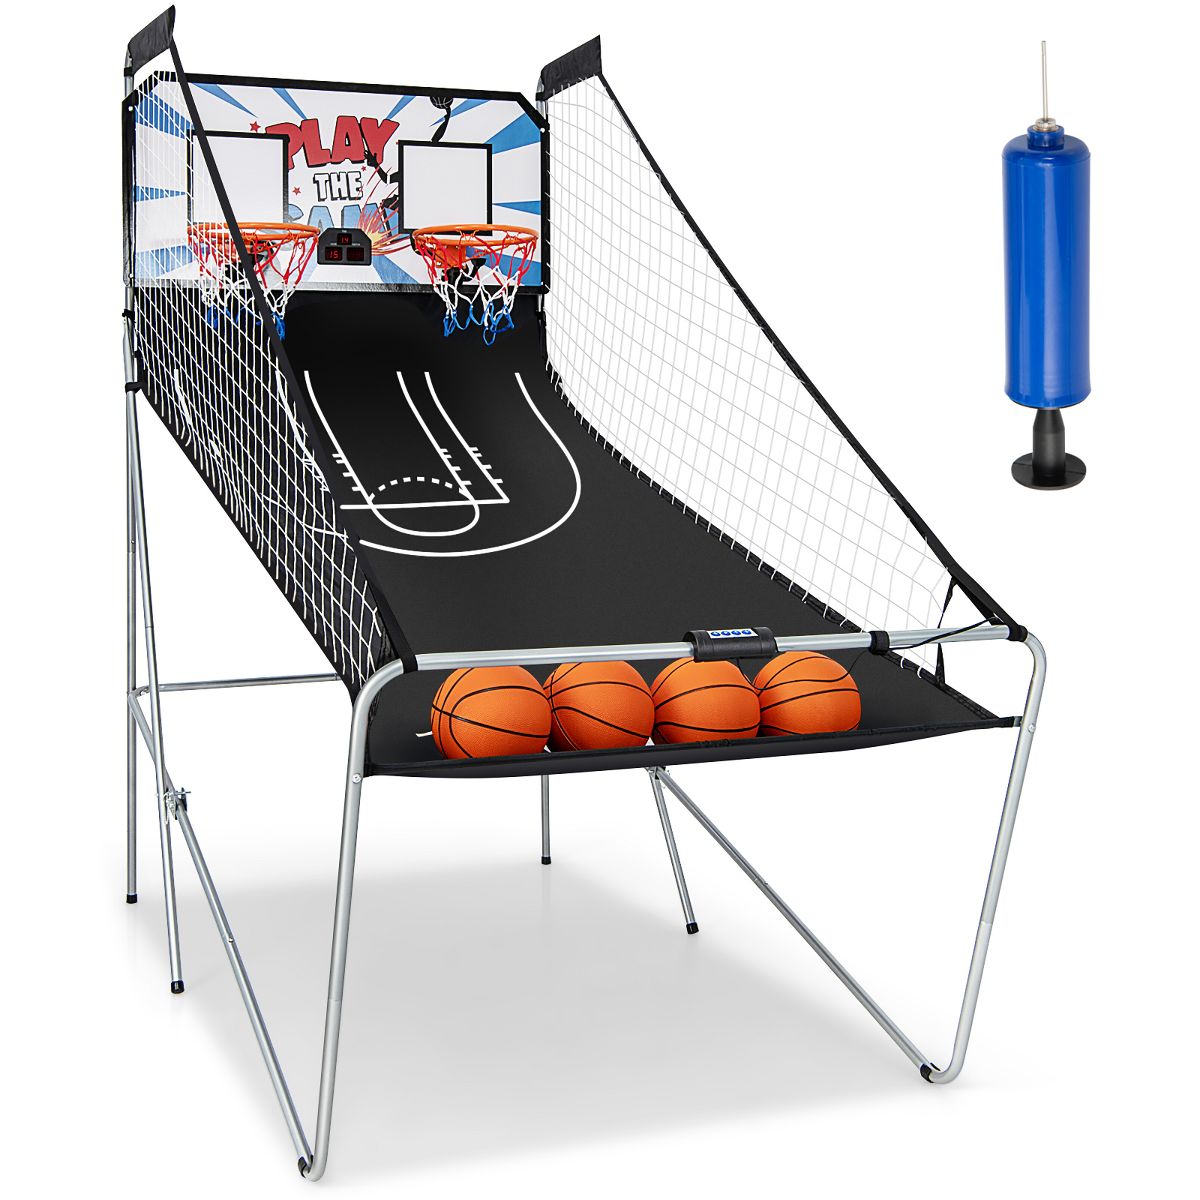 Costway Dual LED Electronic Shot Basketball Arcade Game with 8 Game Modes 4 Balls Foldable